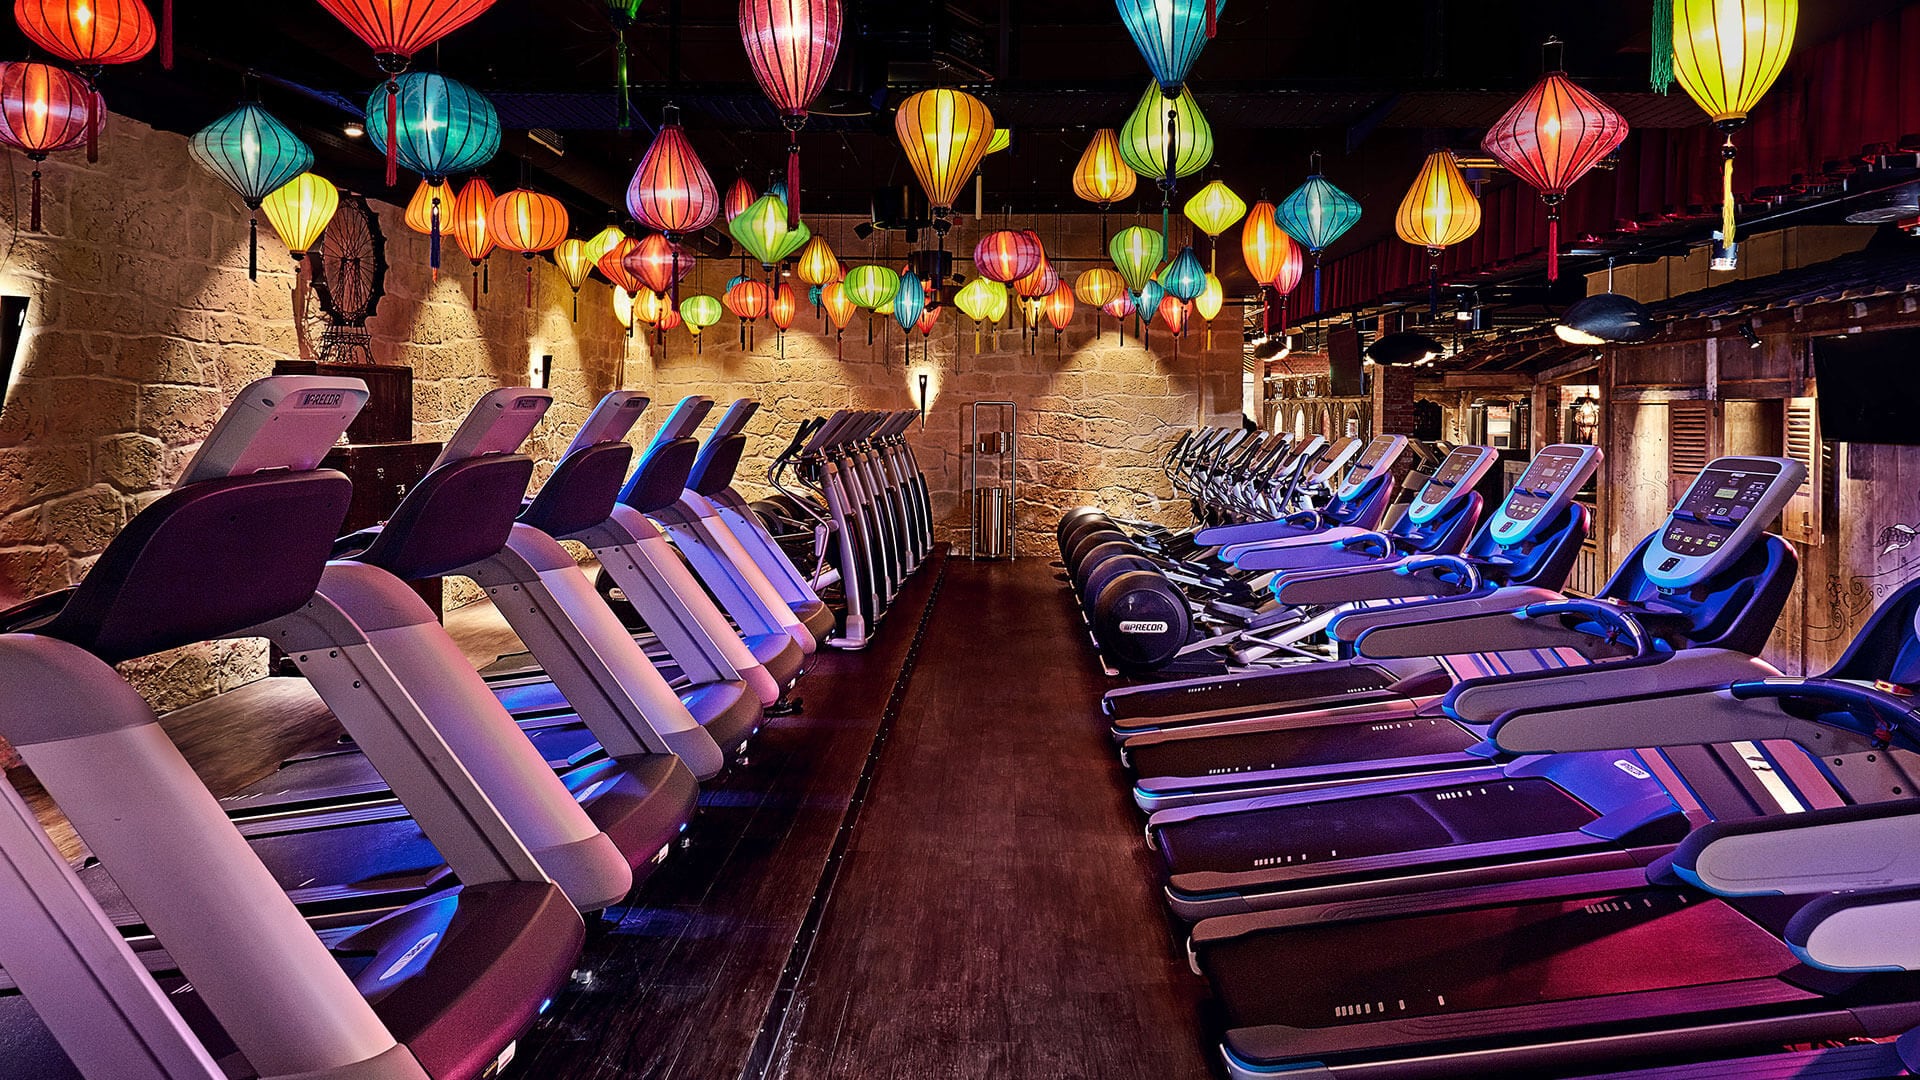 Rows of Treadmills in the interior of a McFit location underneath an arrangement of blue, green, orange and red paper lanterns.